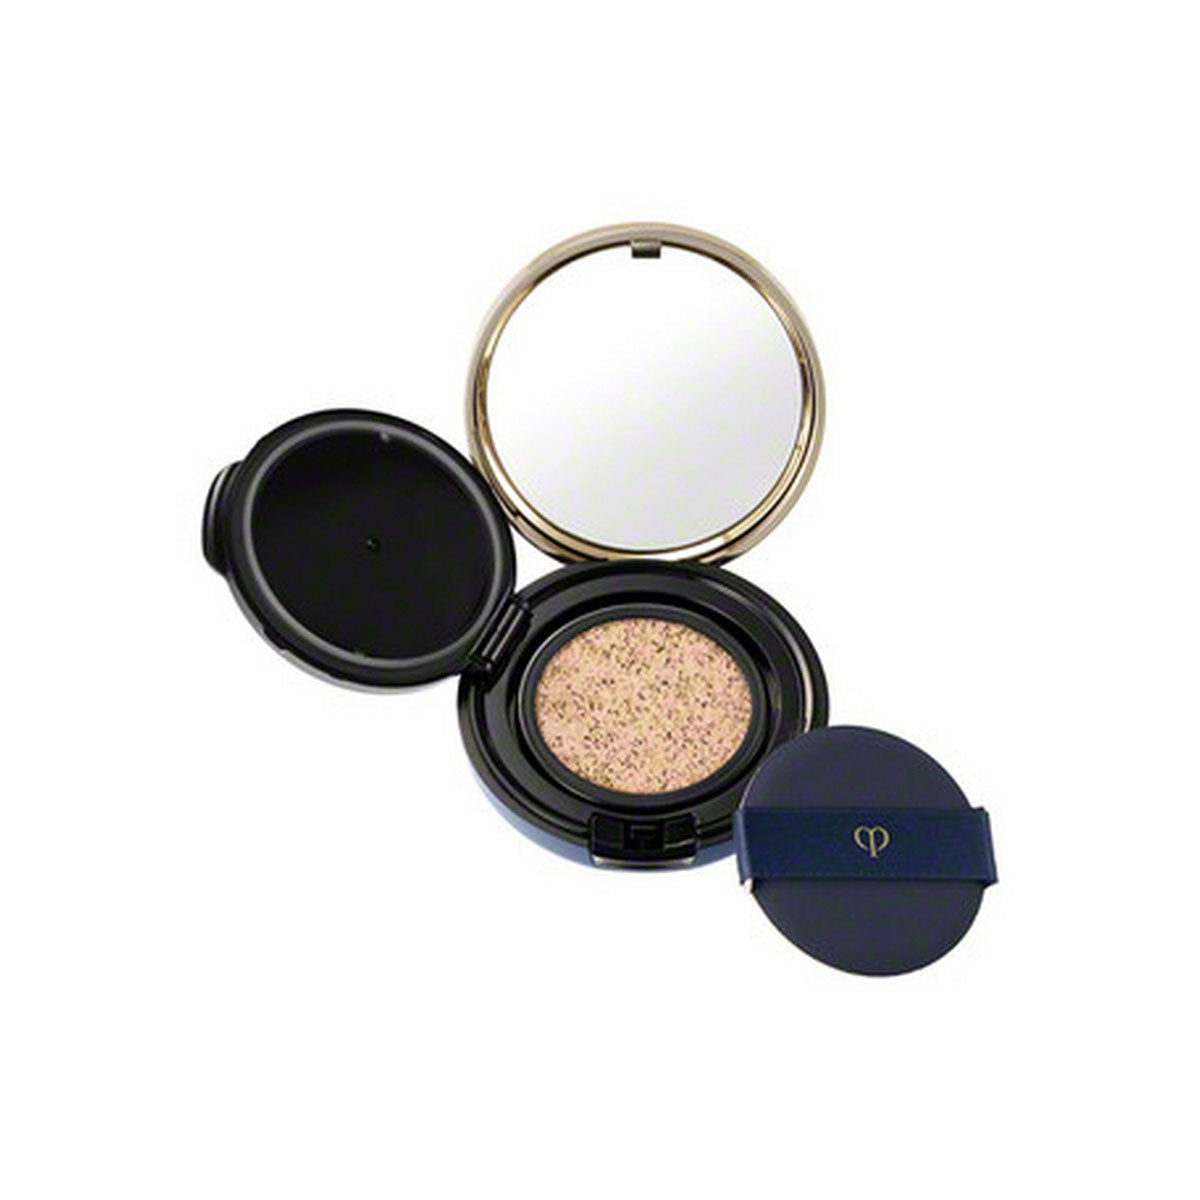 Radiant Cushion Foundation SPF25 PA+++ #OC20 (With Case And Puff) 12g